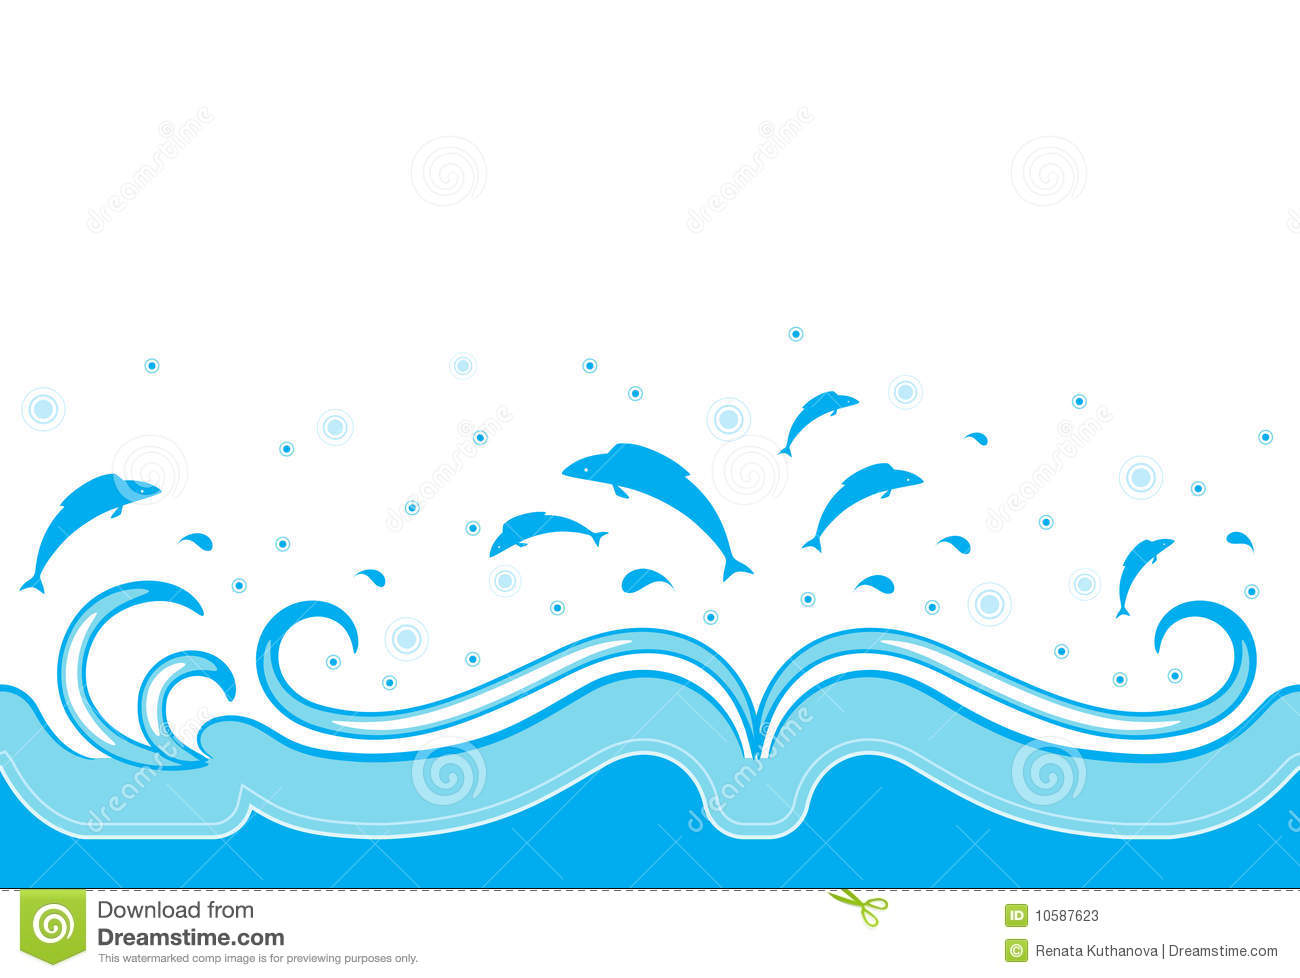 Illustrated Blue Border With Waves And Fishes On White Background